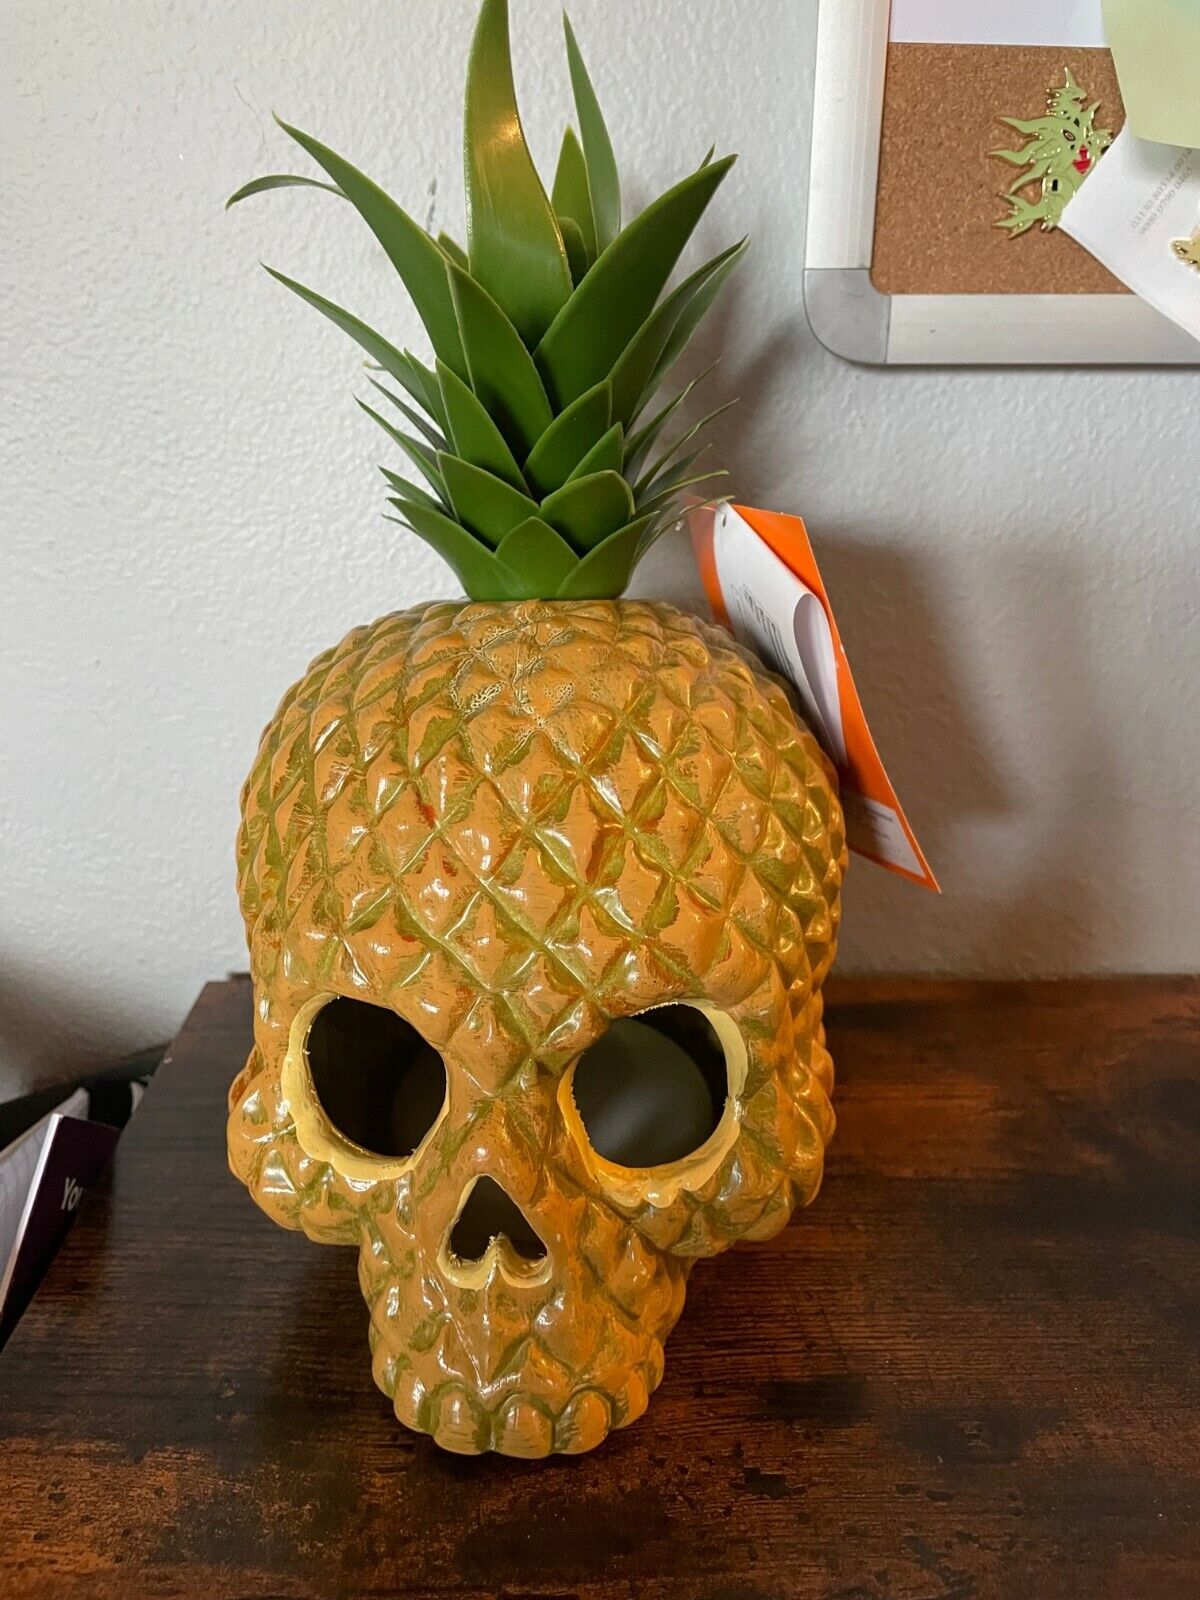 NEW WITH TAGS Hyde & Eek Lit Pineapple Skull Light Up LED Halloween Decor Target